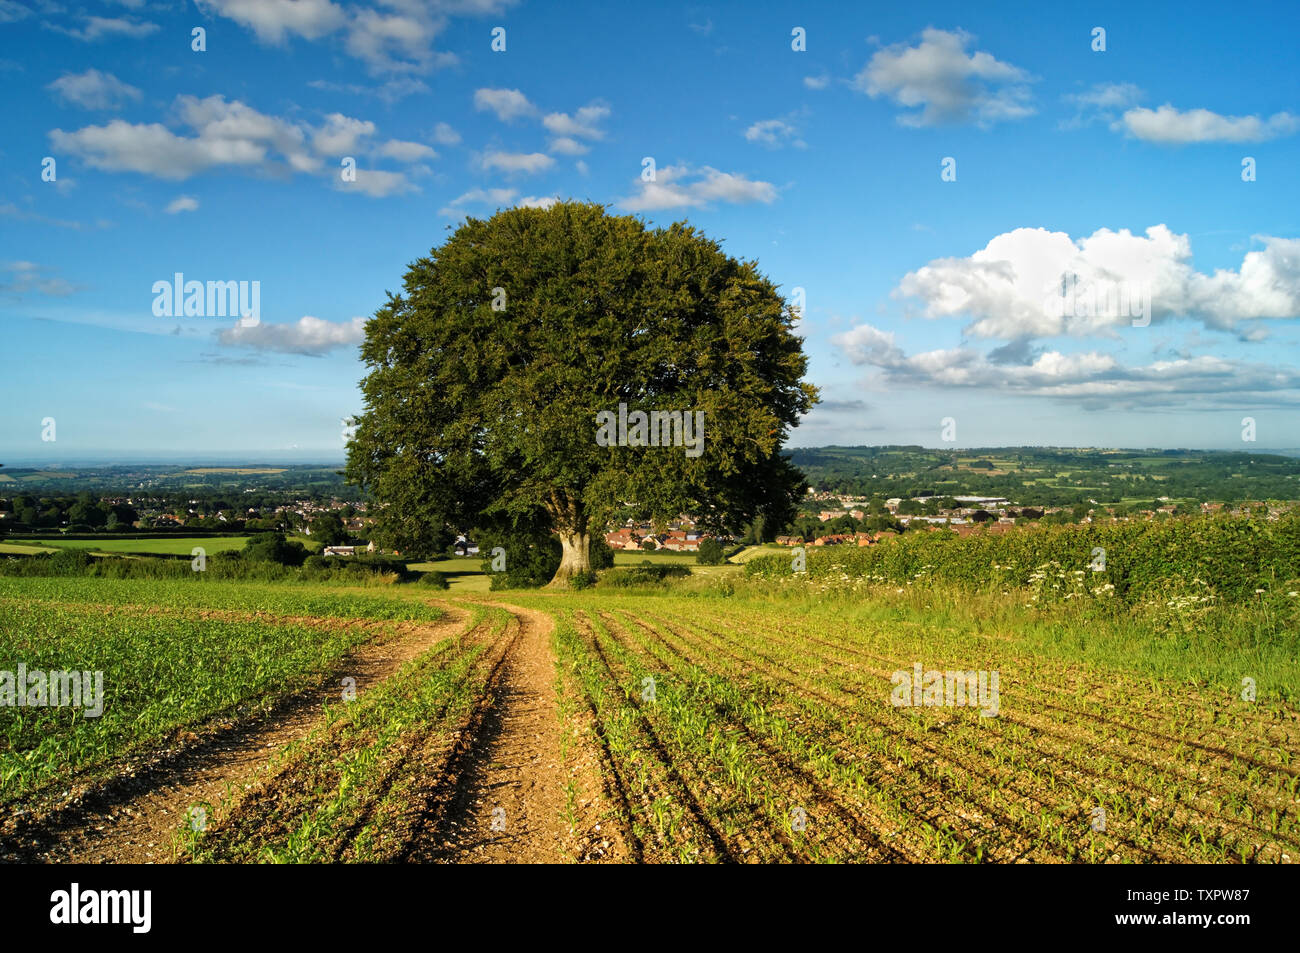 UK,Somerset,Chard,Snowdon Hill,Ploughed Field,Young Crops & Beech Trees overlooking Chard Stock Photo